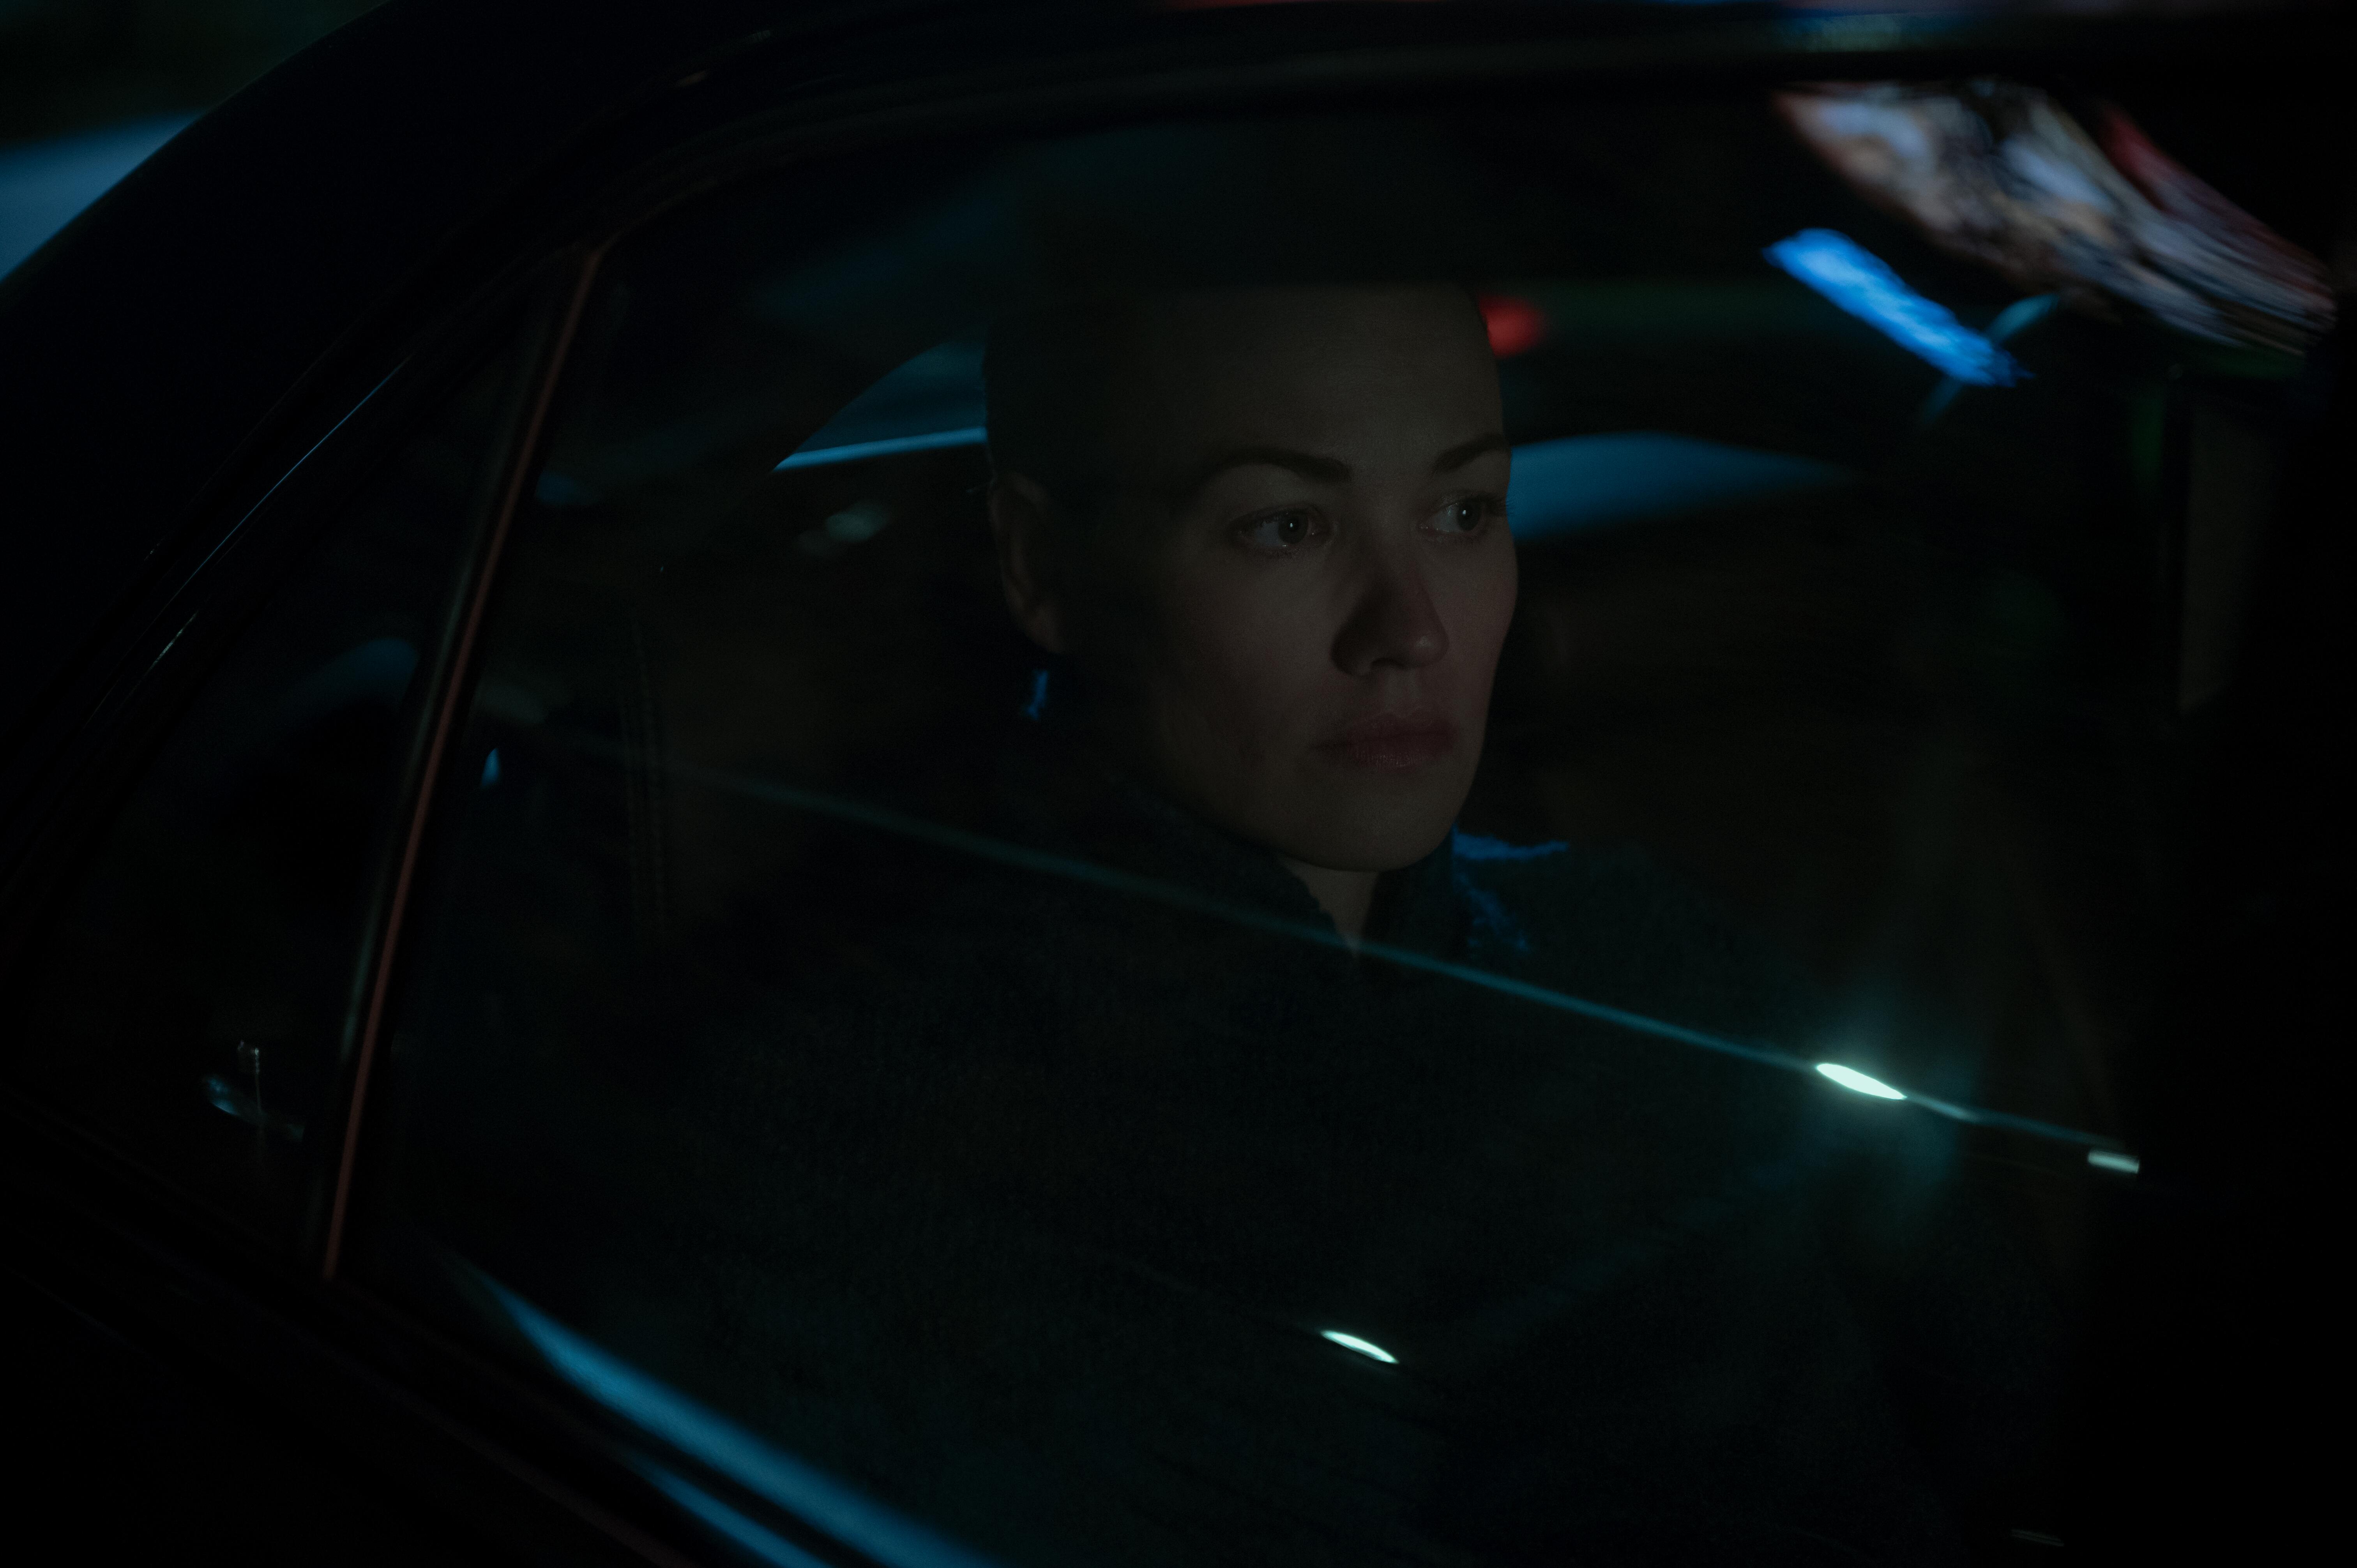 Serena Joy (Yvonne Strahovski), who gets transferred to a new home in 'The Handmaid's Tale' Season 5 Episode 4 'Dear Offred'